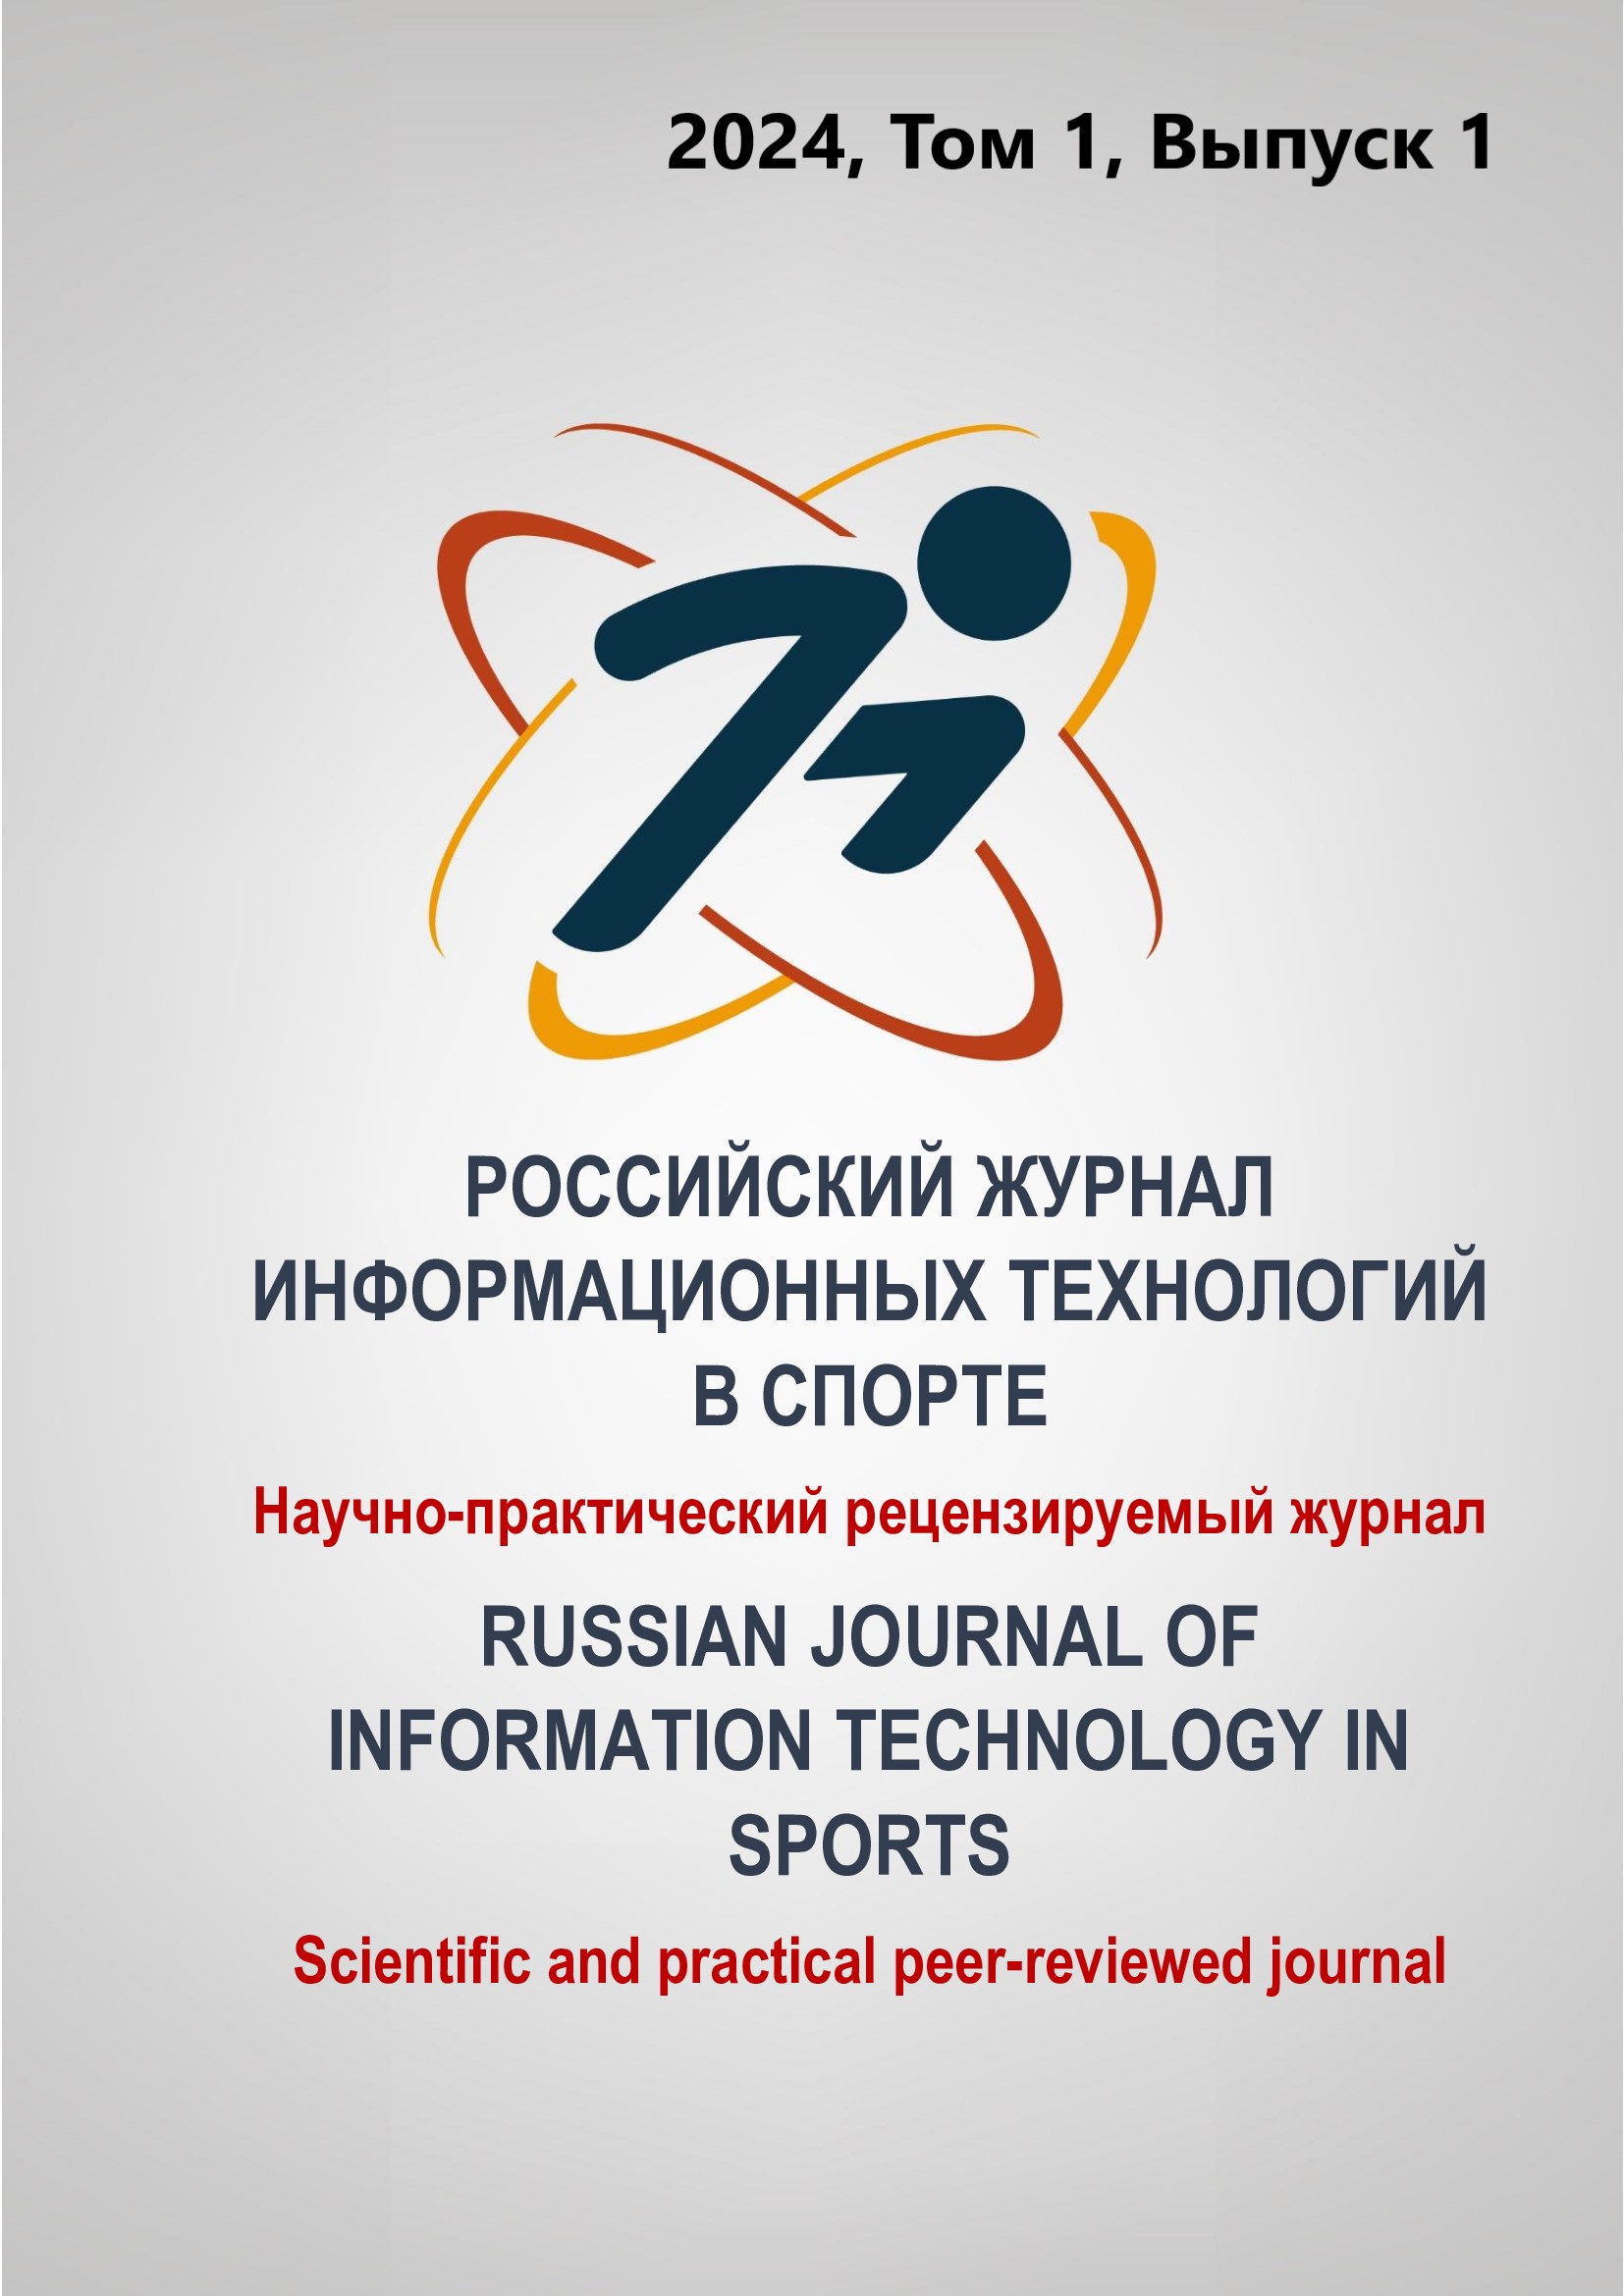                         Russian Journal of Information Technology in Sports
            